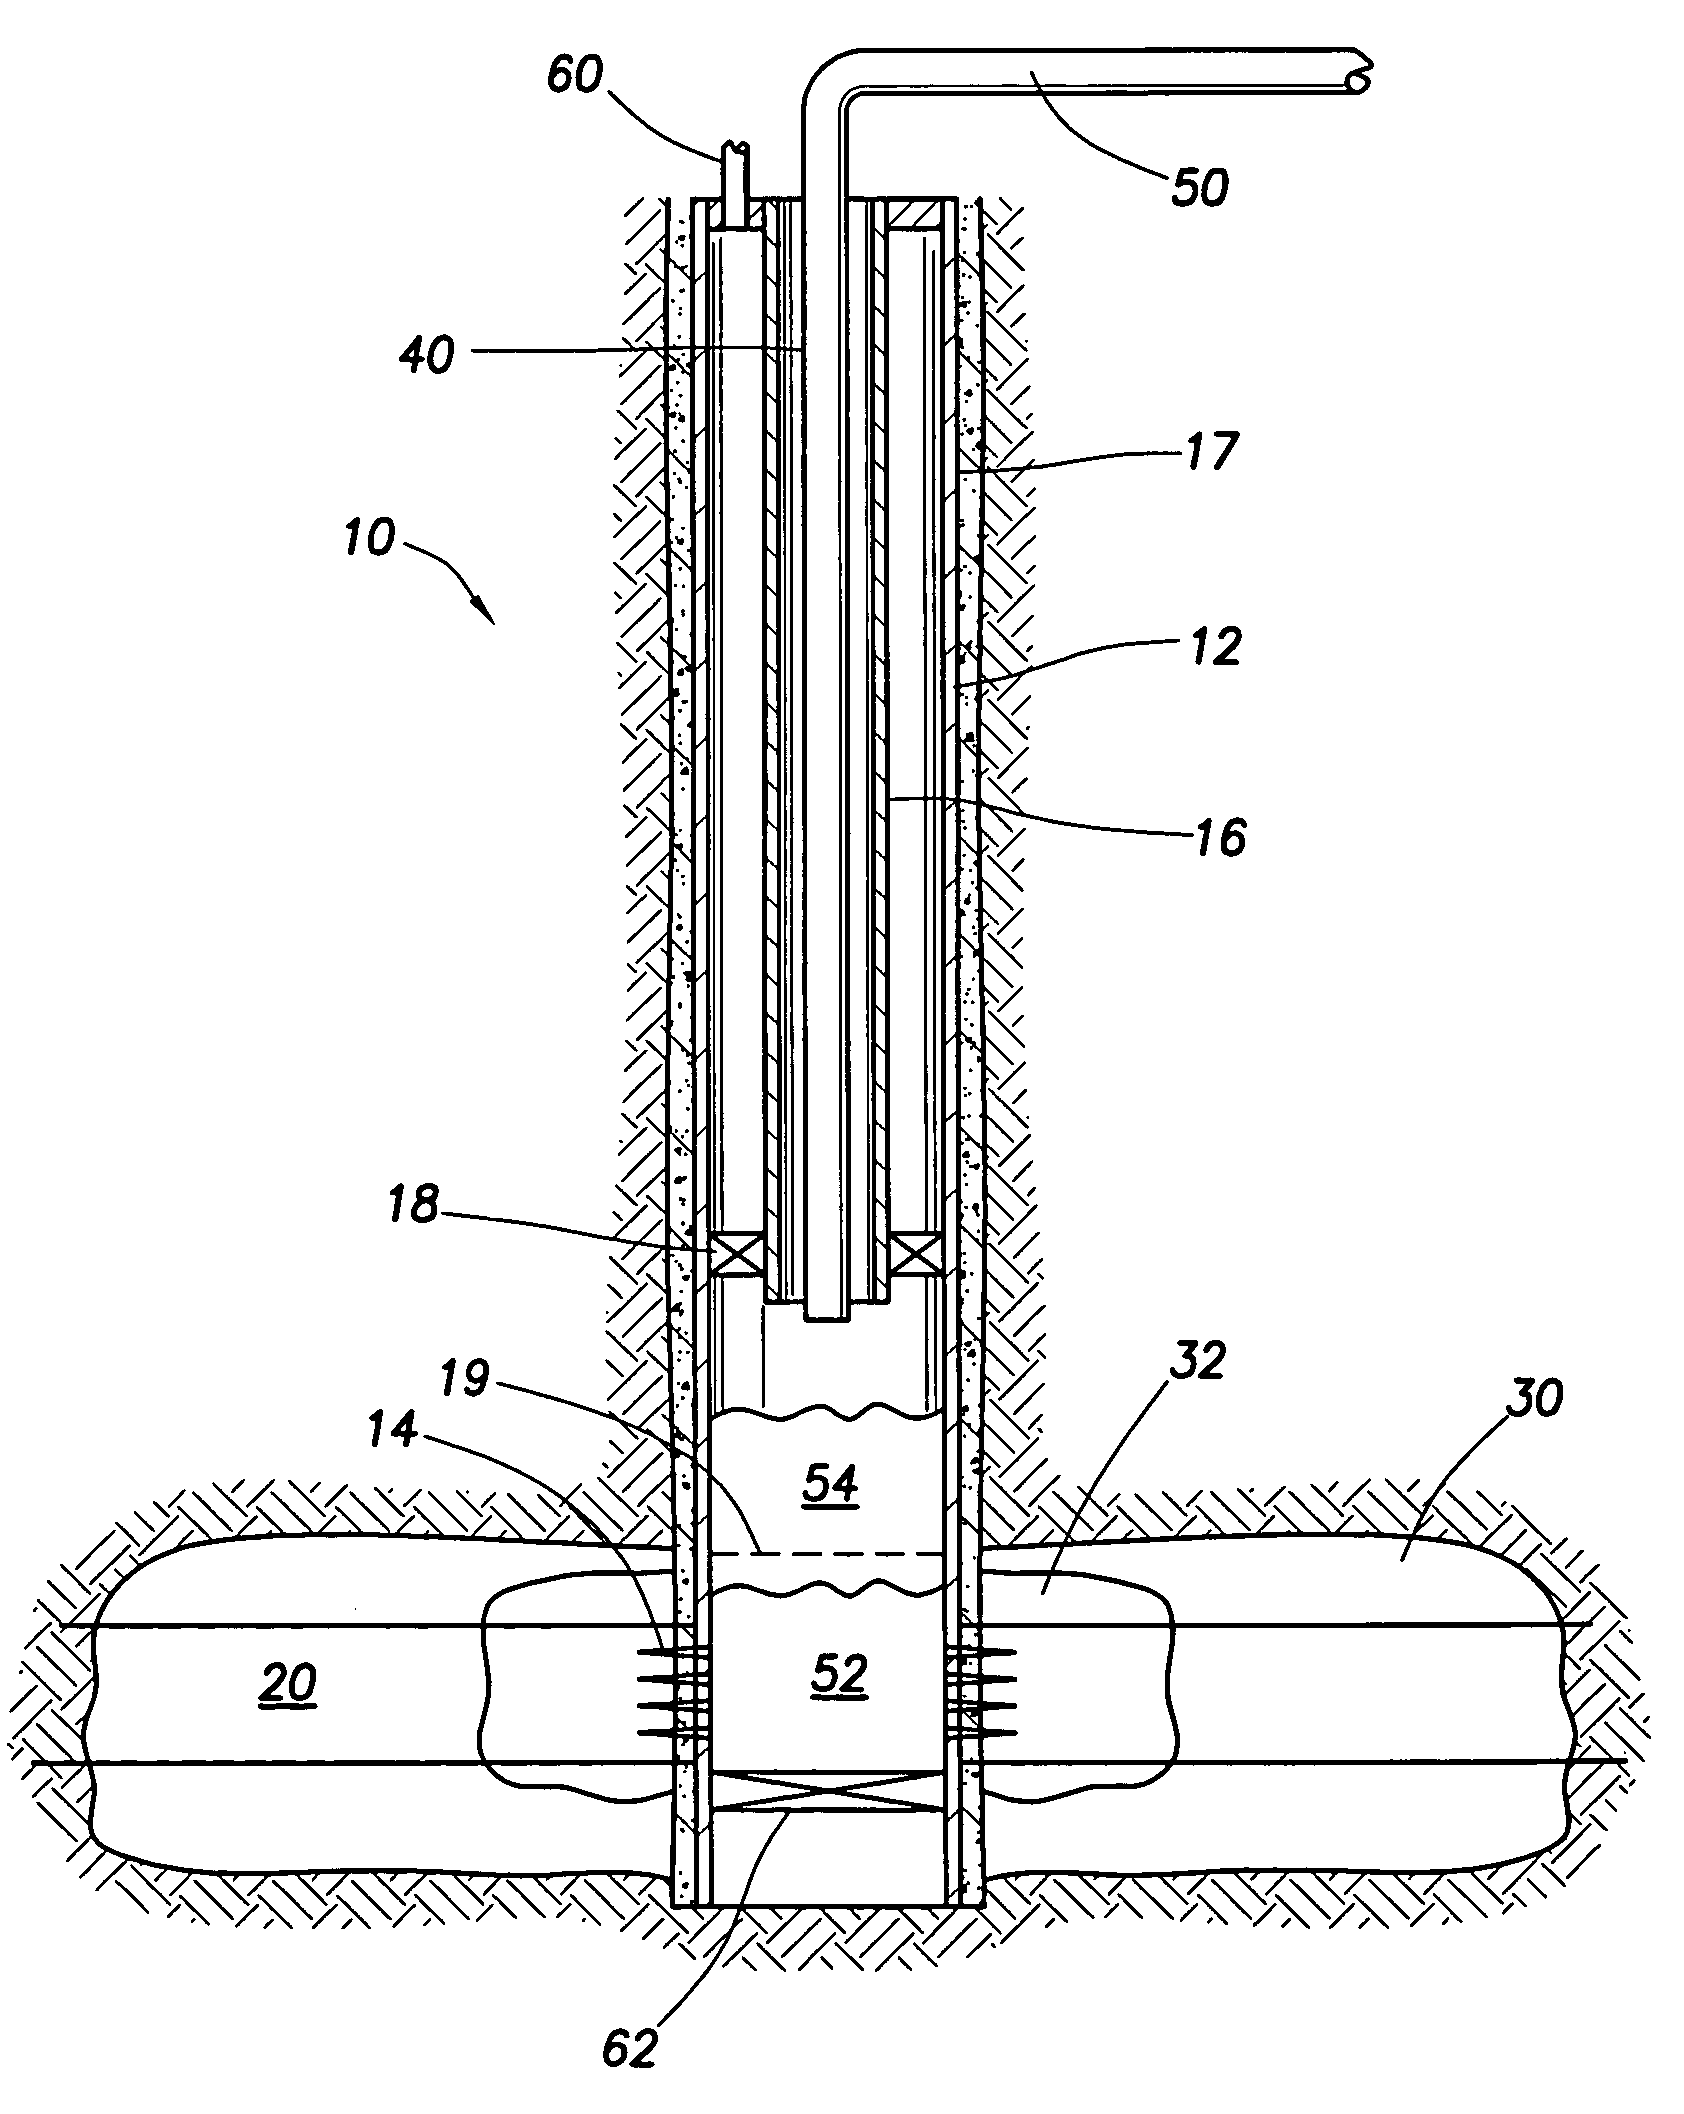 Method for hydraulic fracturing with squeeze pressure